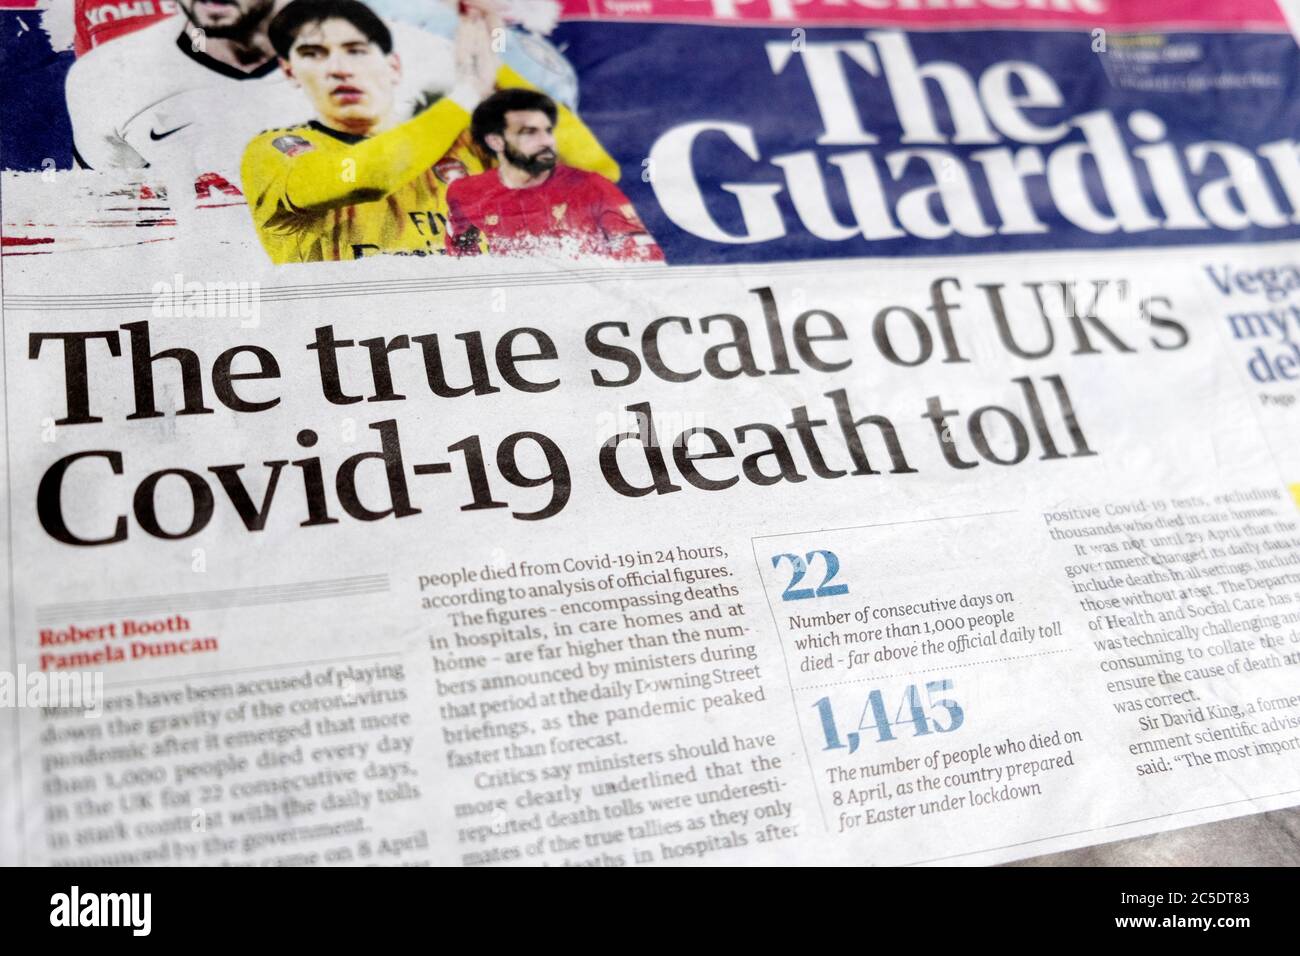 'The true scale of UK's Covid-19 death toll' newspaper headline on front page of the Guardian  20 June 2020 London England UK Stock Photo